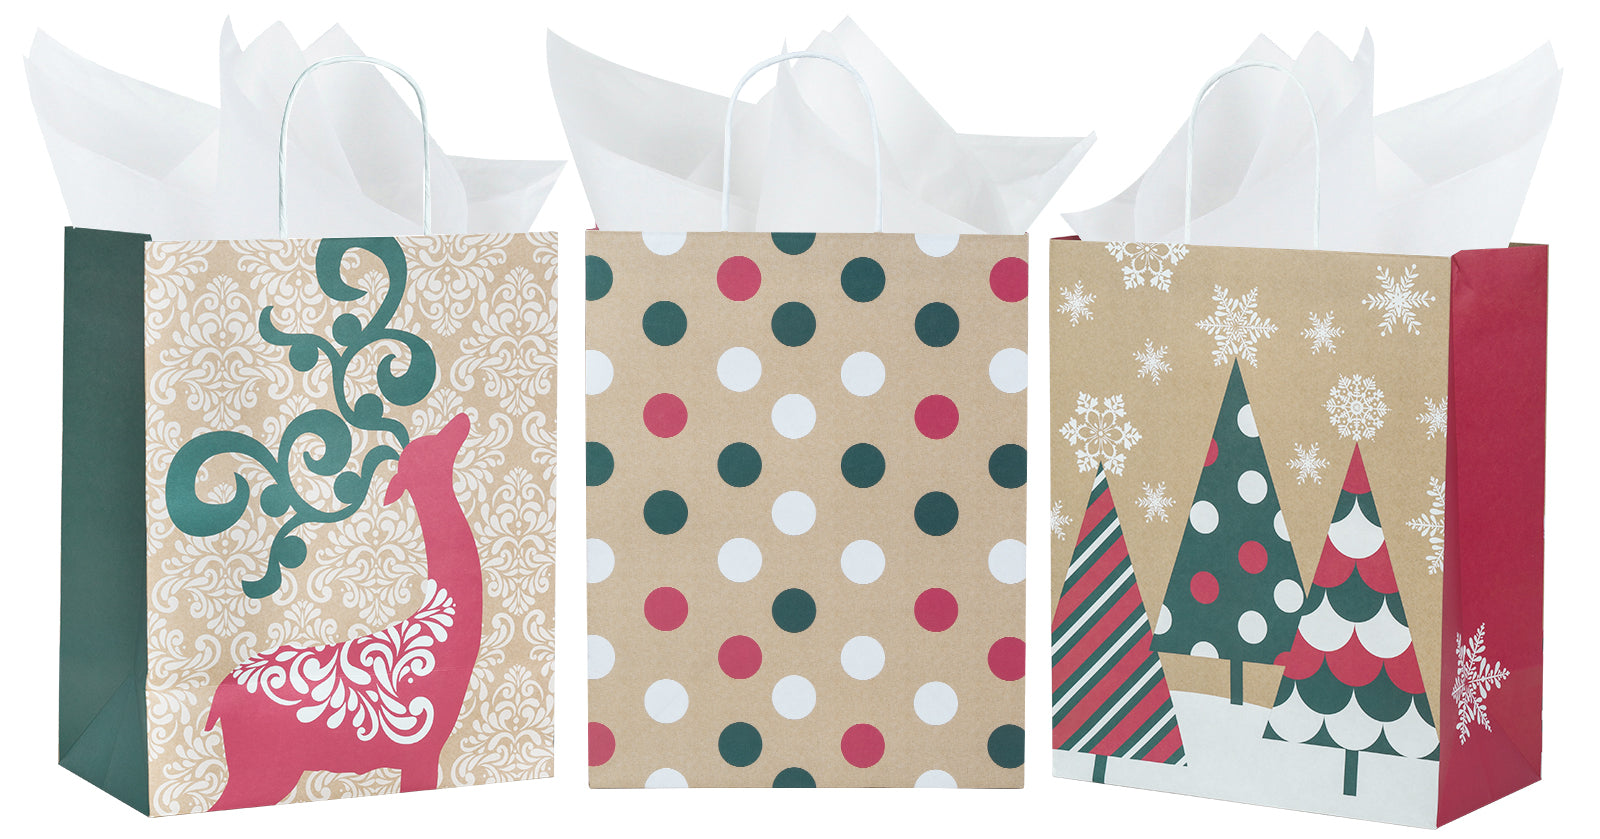 Assort Large Christmas Gift Bags - Elk/ Rudolph/ Christmas Tree - 9 Pack,10x5x13 inch